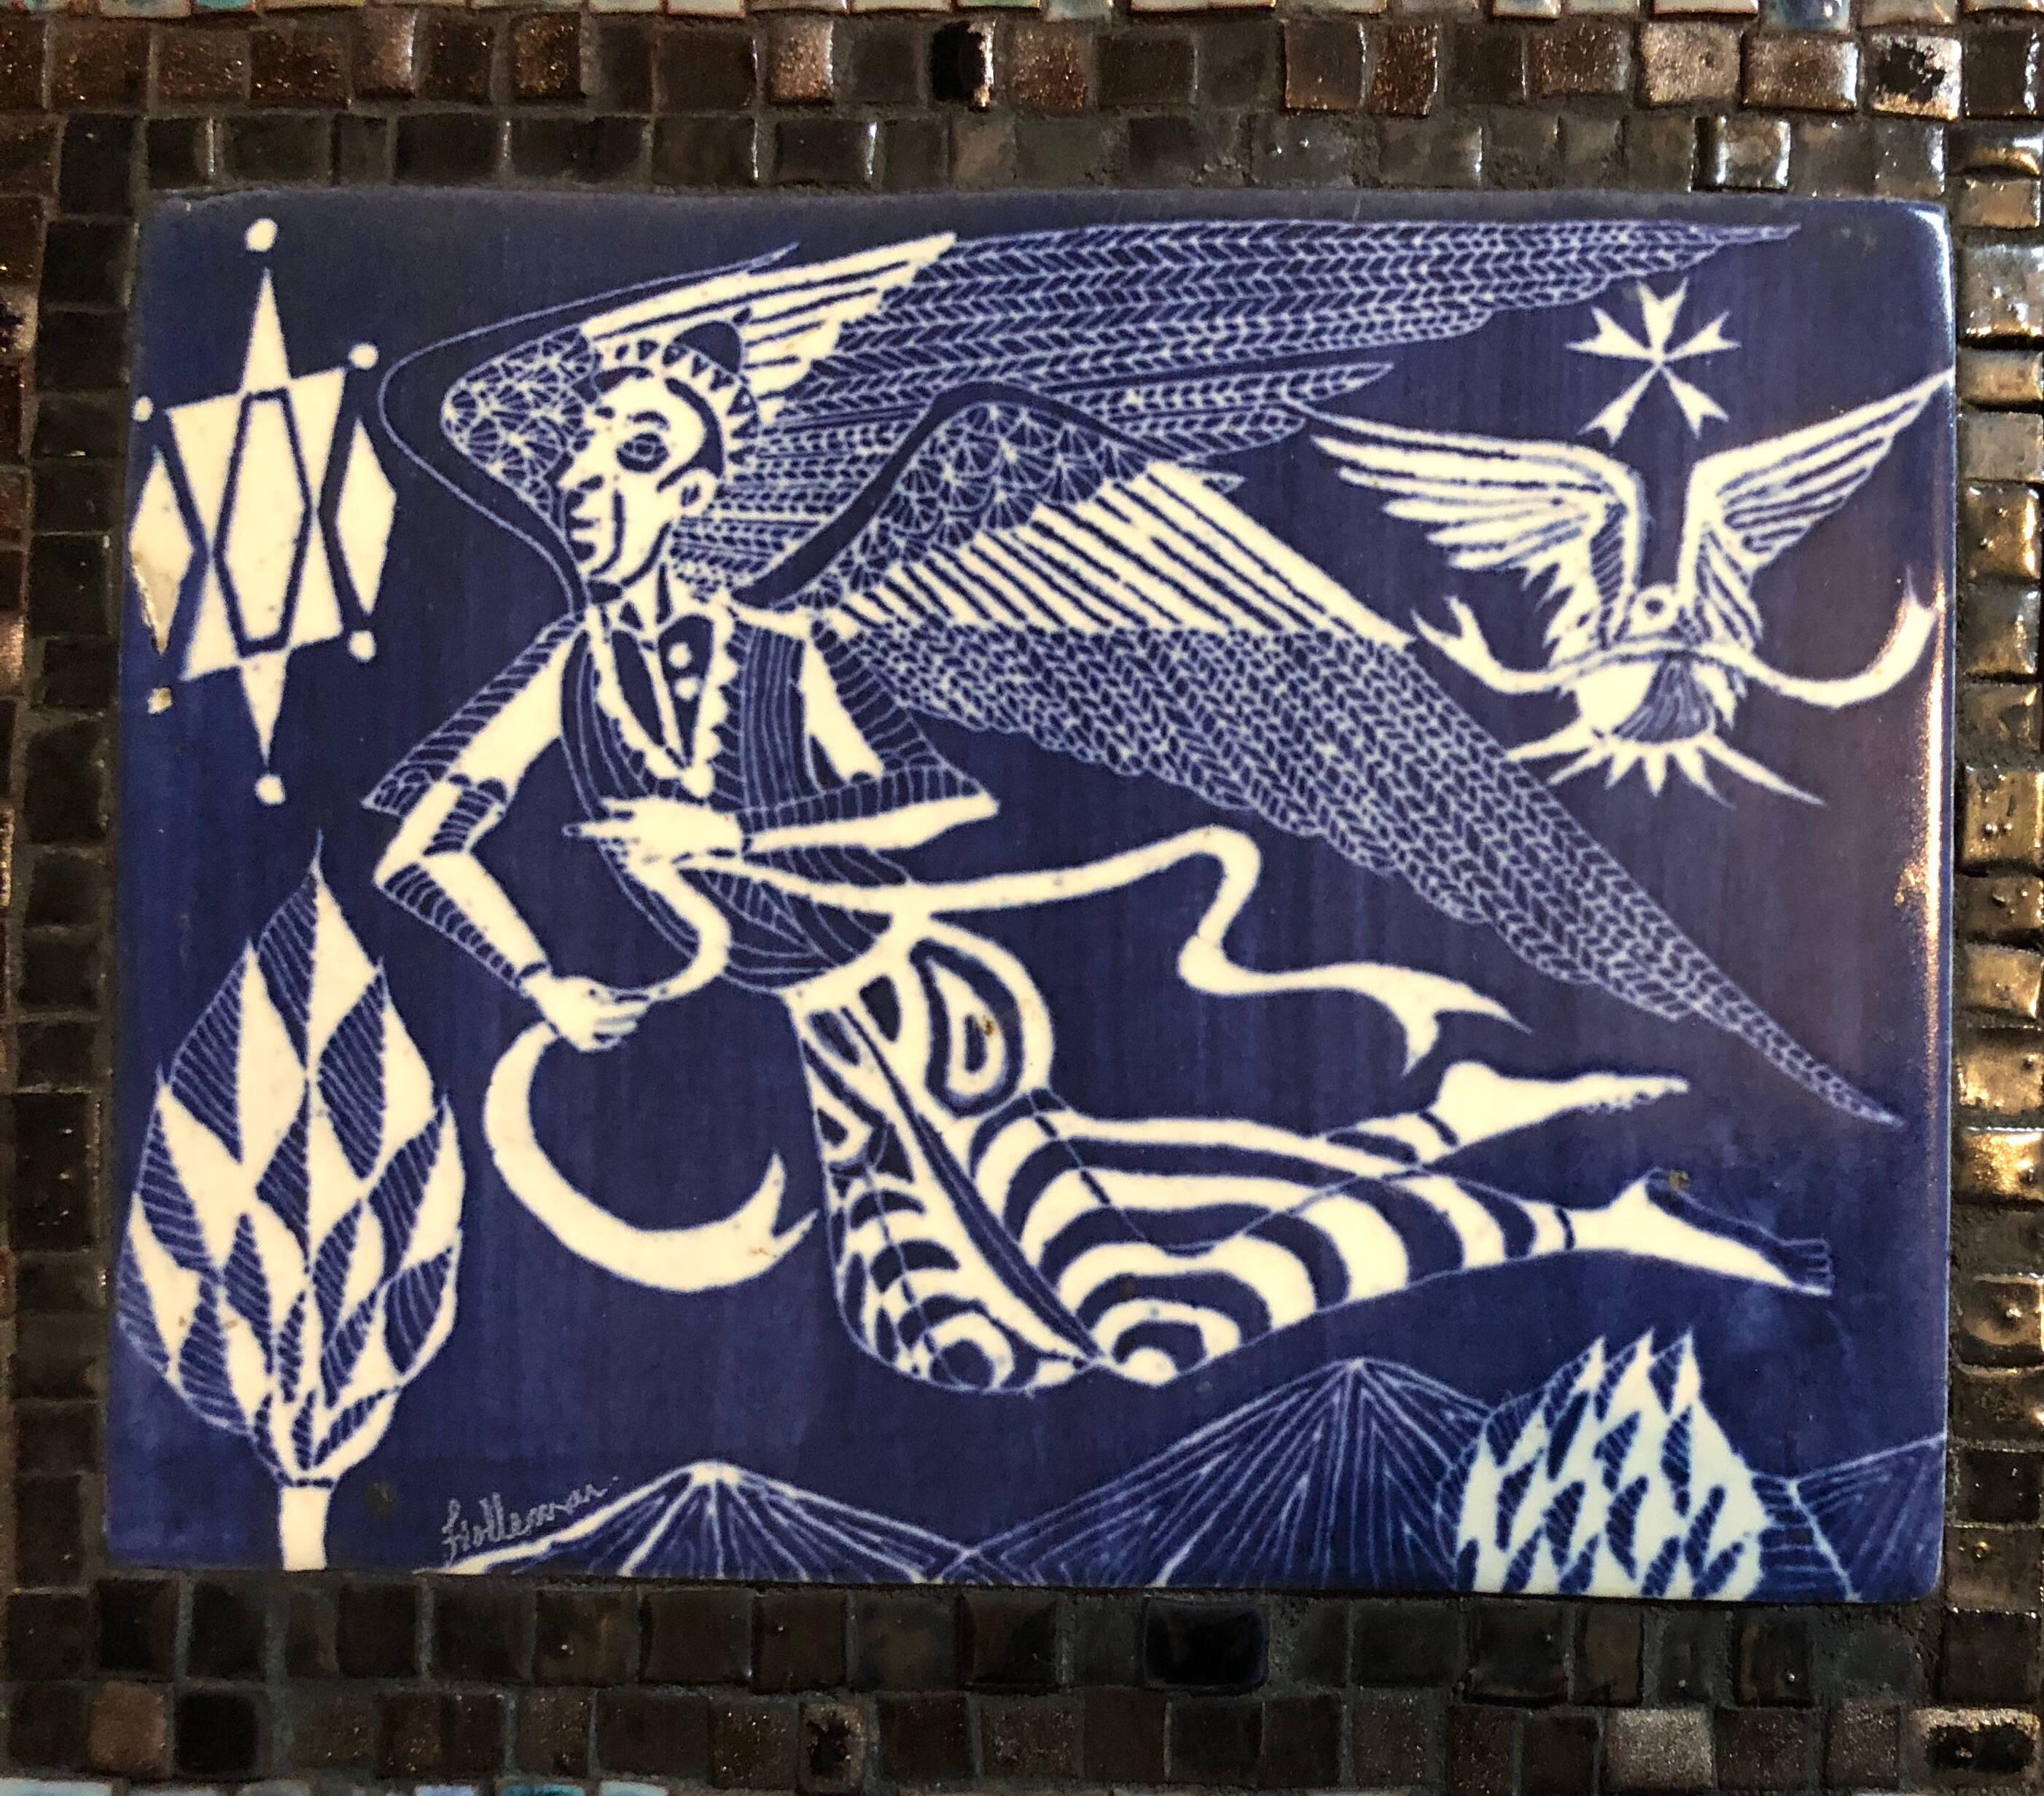 Rare Vintage Judaica Tile Mosaic with Sgraffito Hebrew Calligraphy - American Modern Sculpture by David Holleman